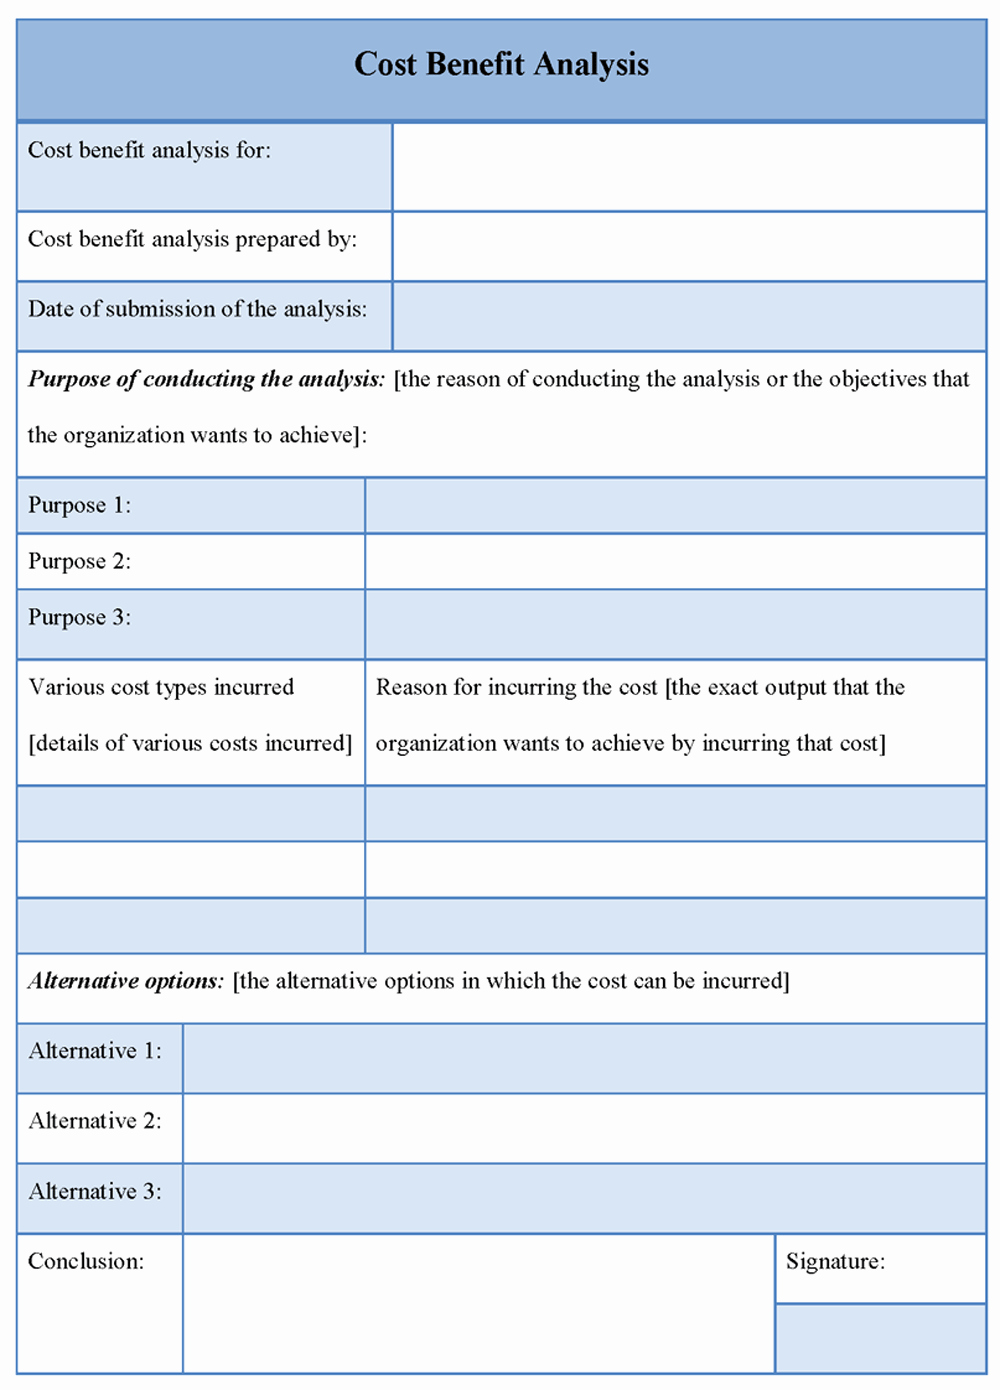 Cost Benefit Analysis Template Excel Best Of Cost Benefit Analysis Template